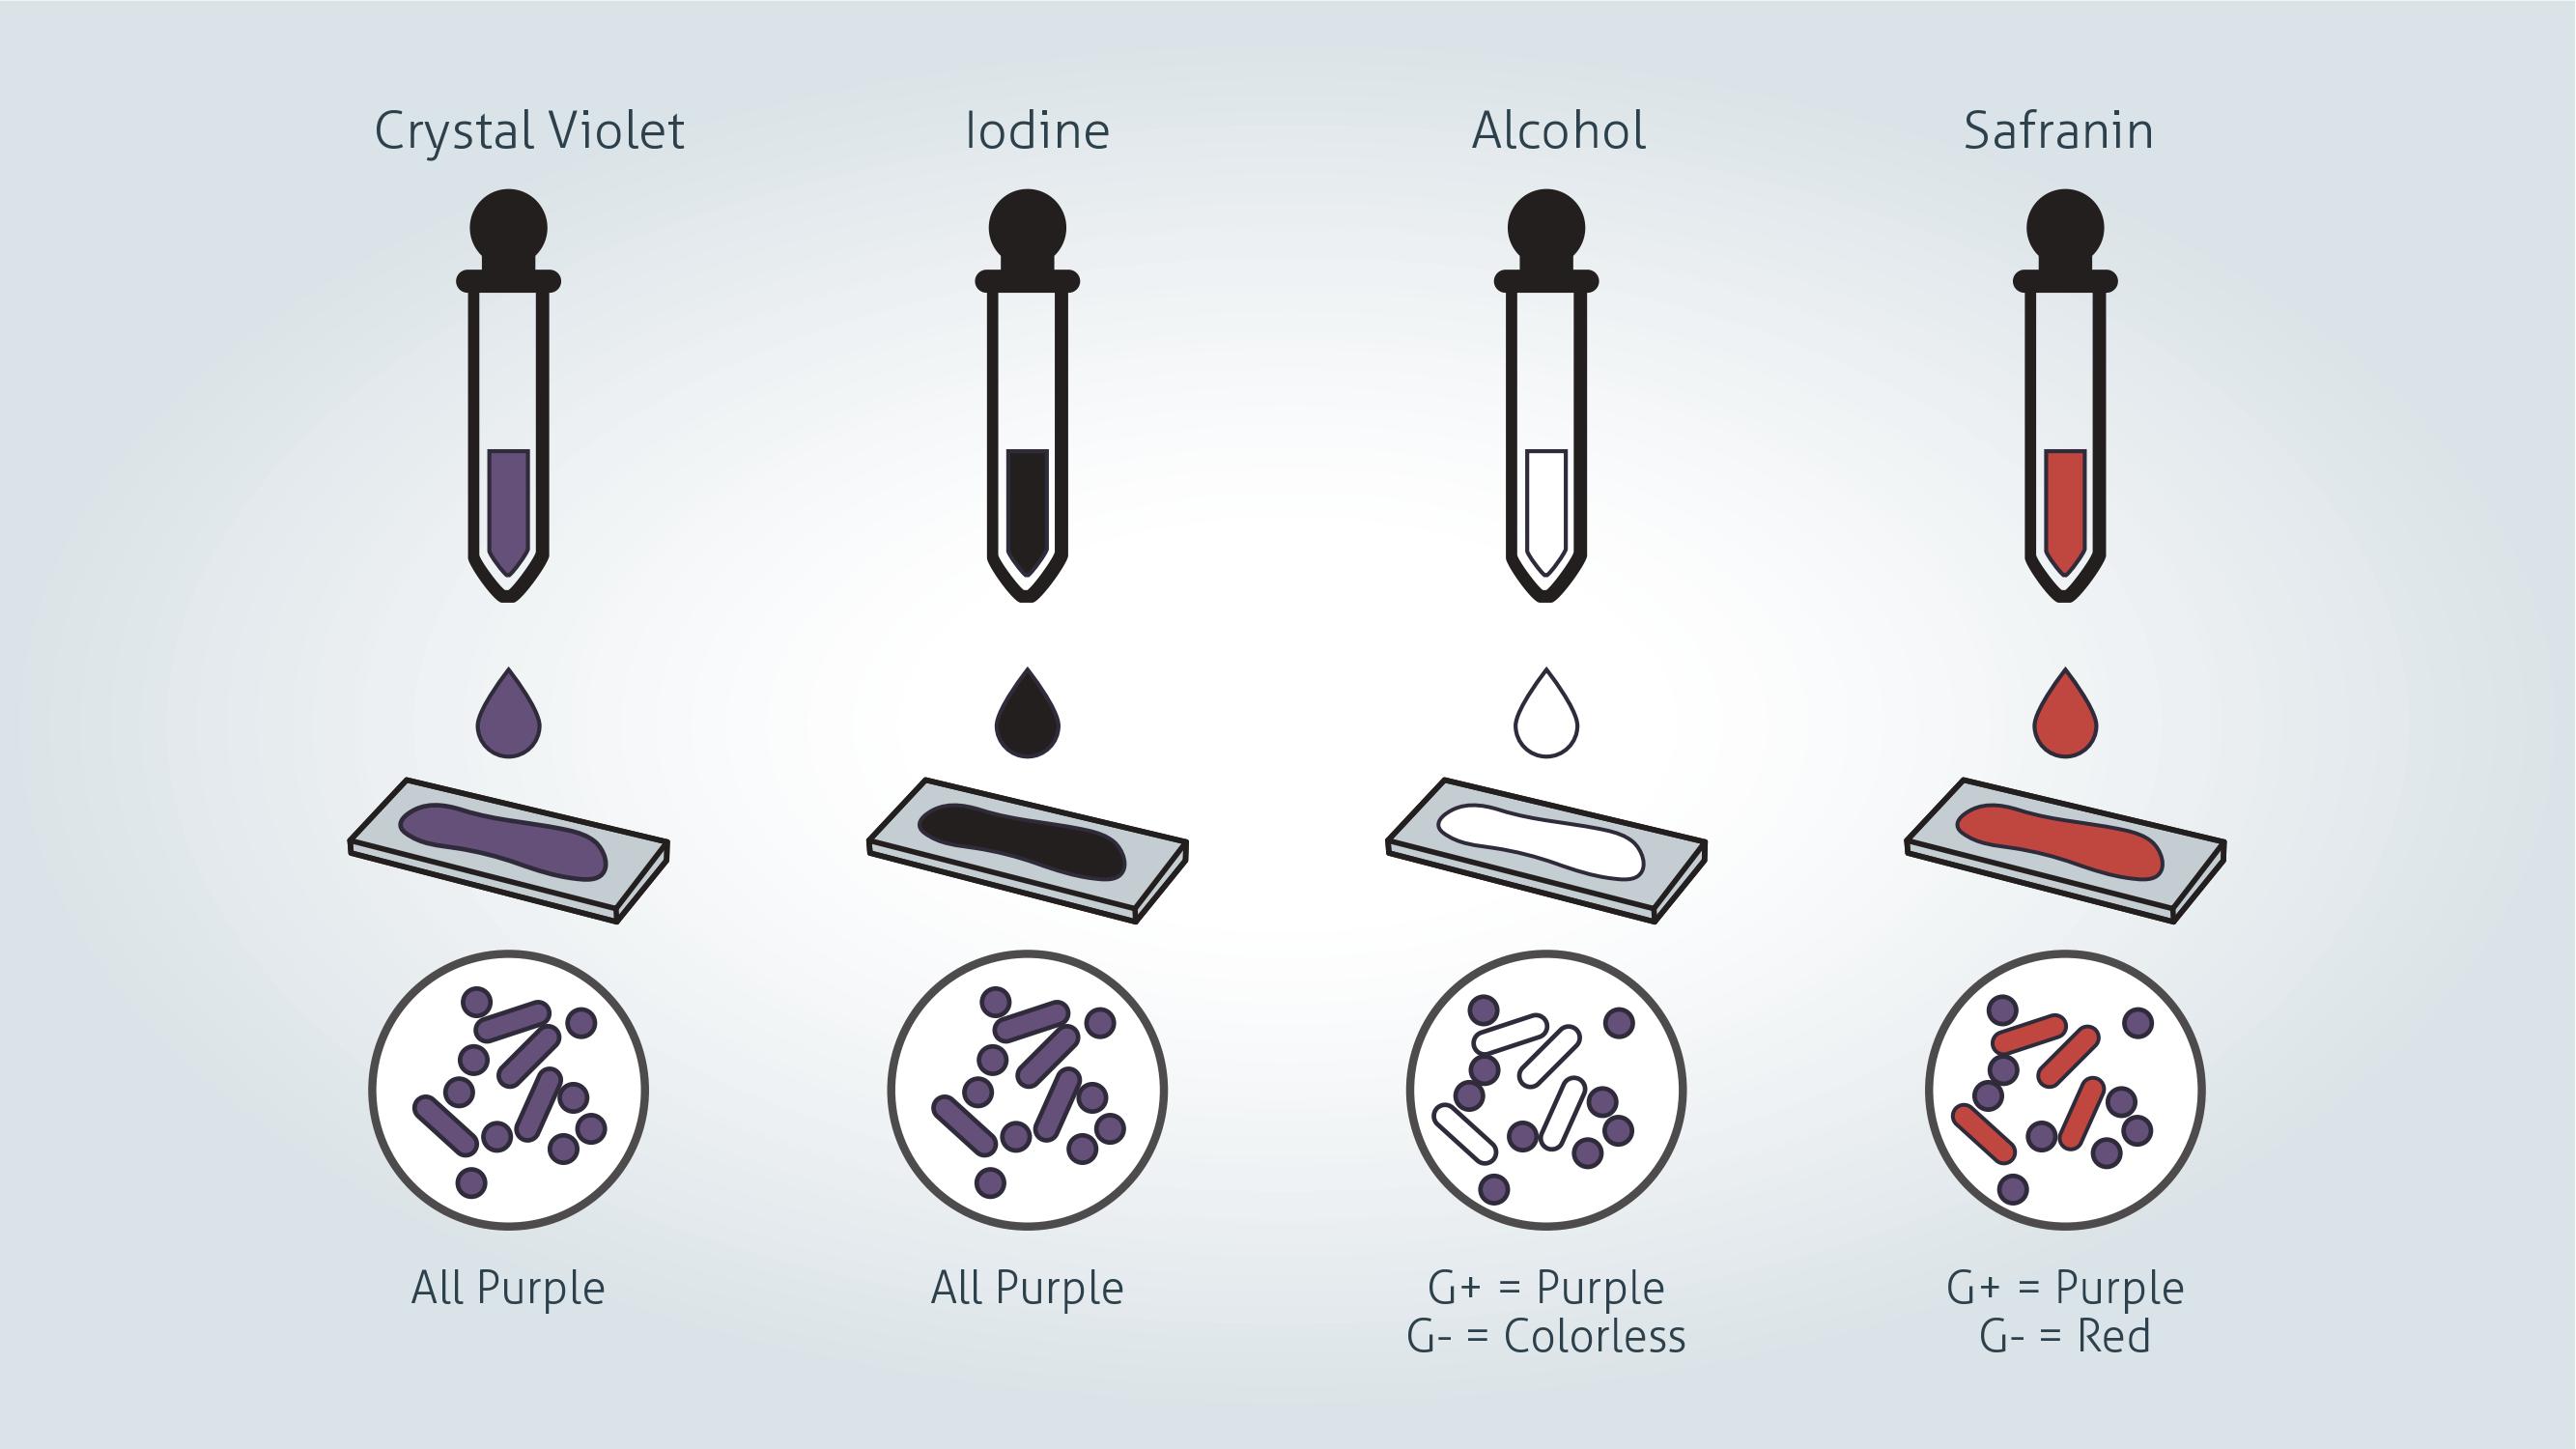 The color of gram positive and gram negative bacteria at each stage of gram staining